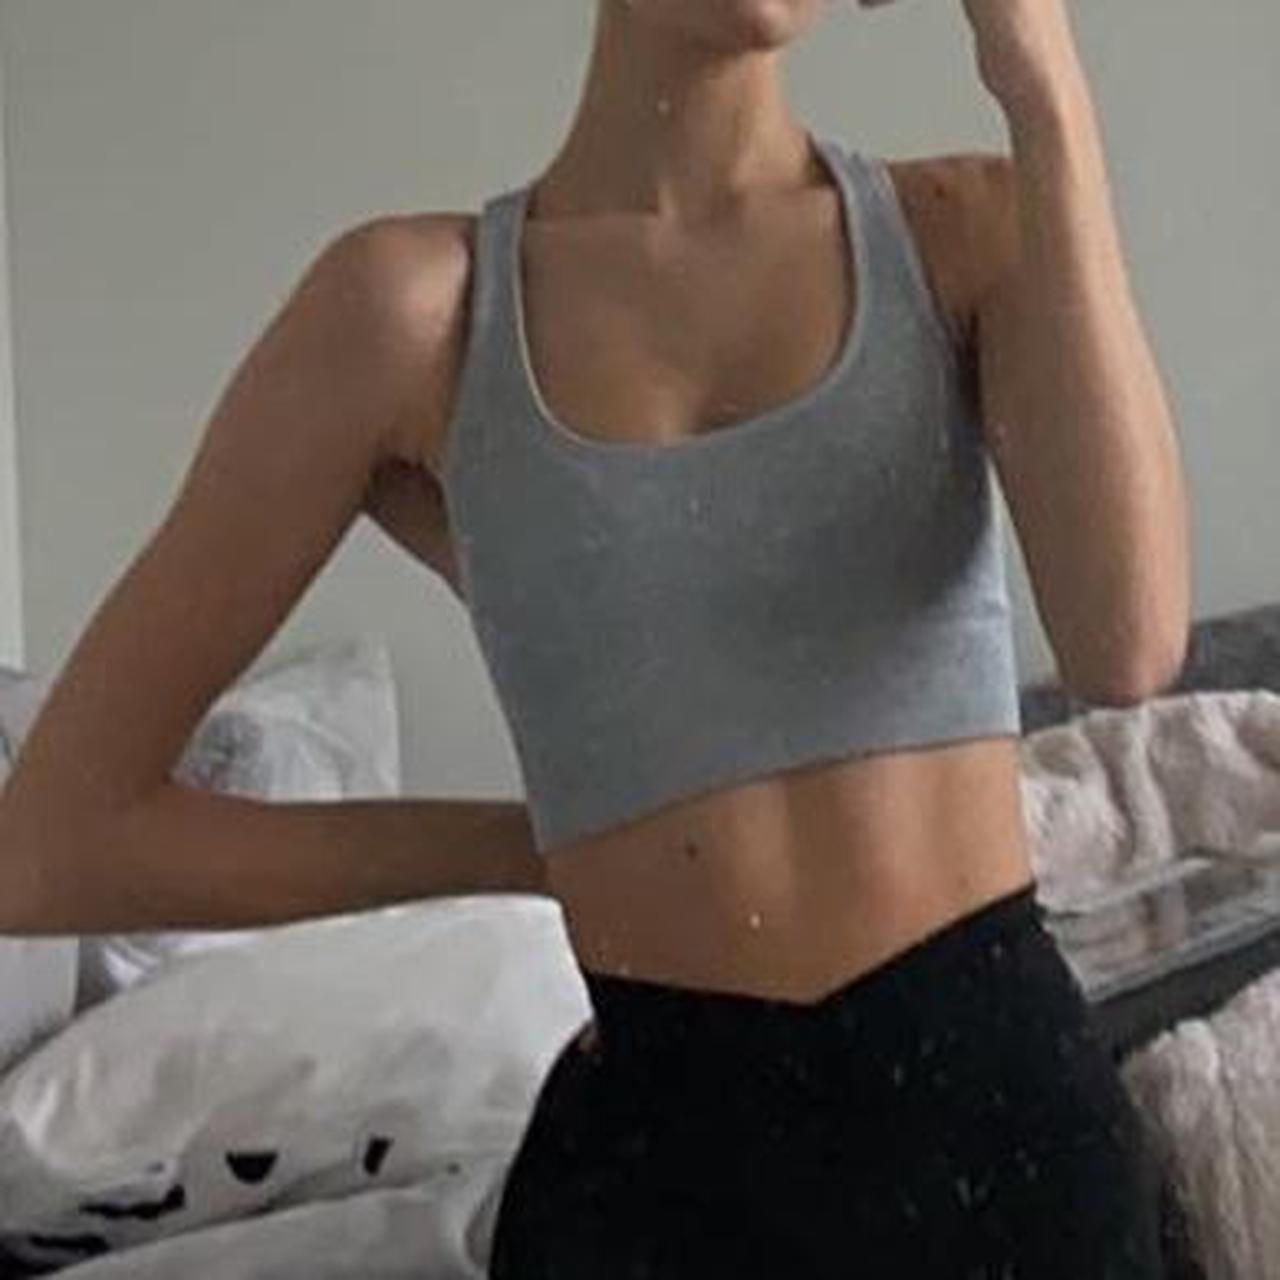 small ribbed gray sports bra worn a few times to - Depop